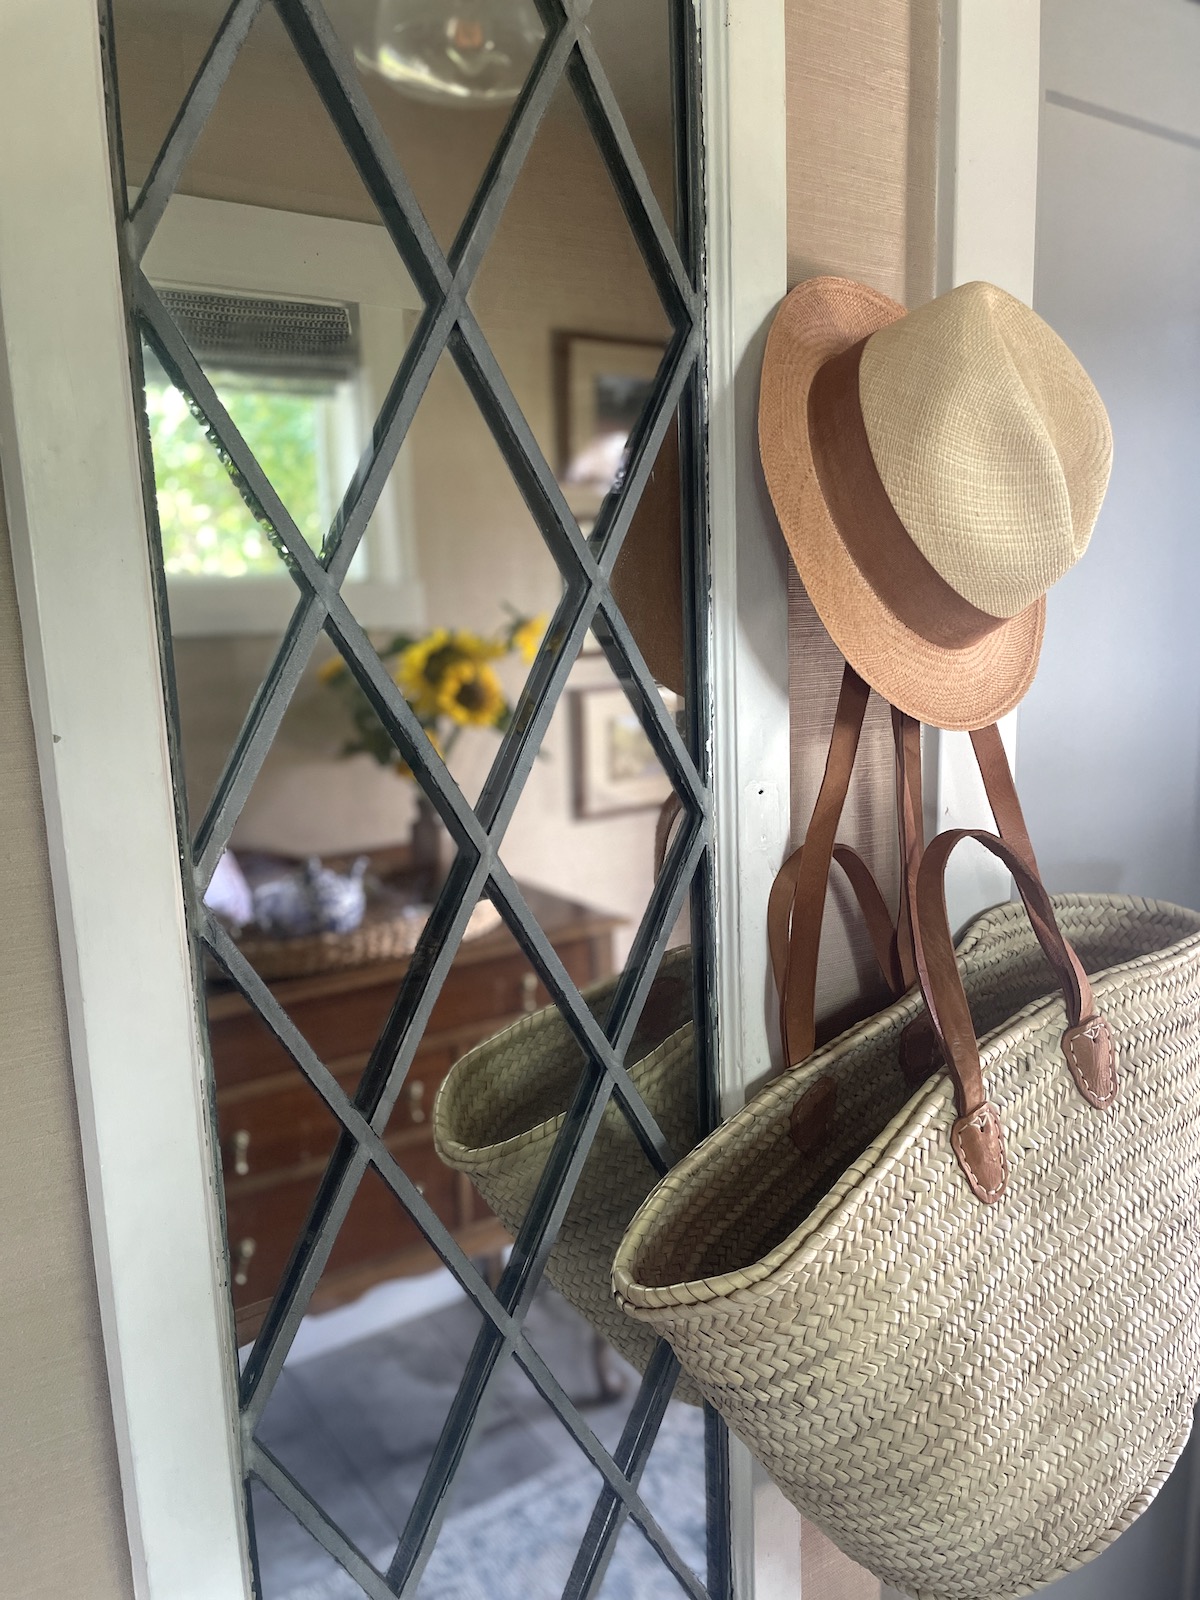 A Cottage Entry and Screen Door for a Craftsman, tour of TSLL’s Home, Le Papillon